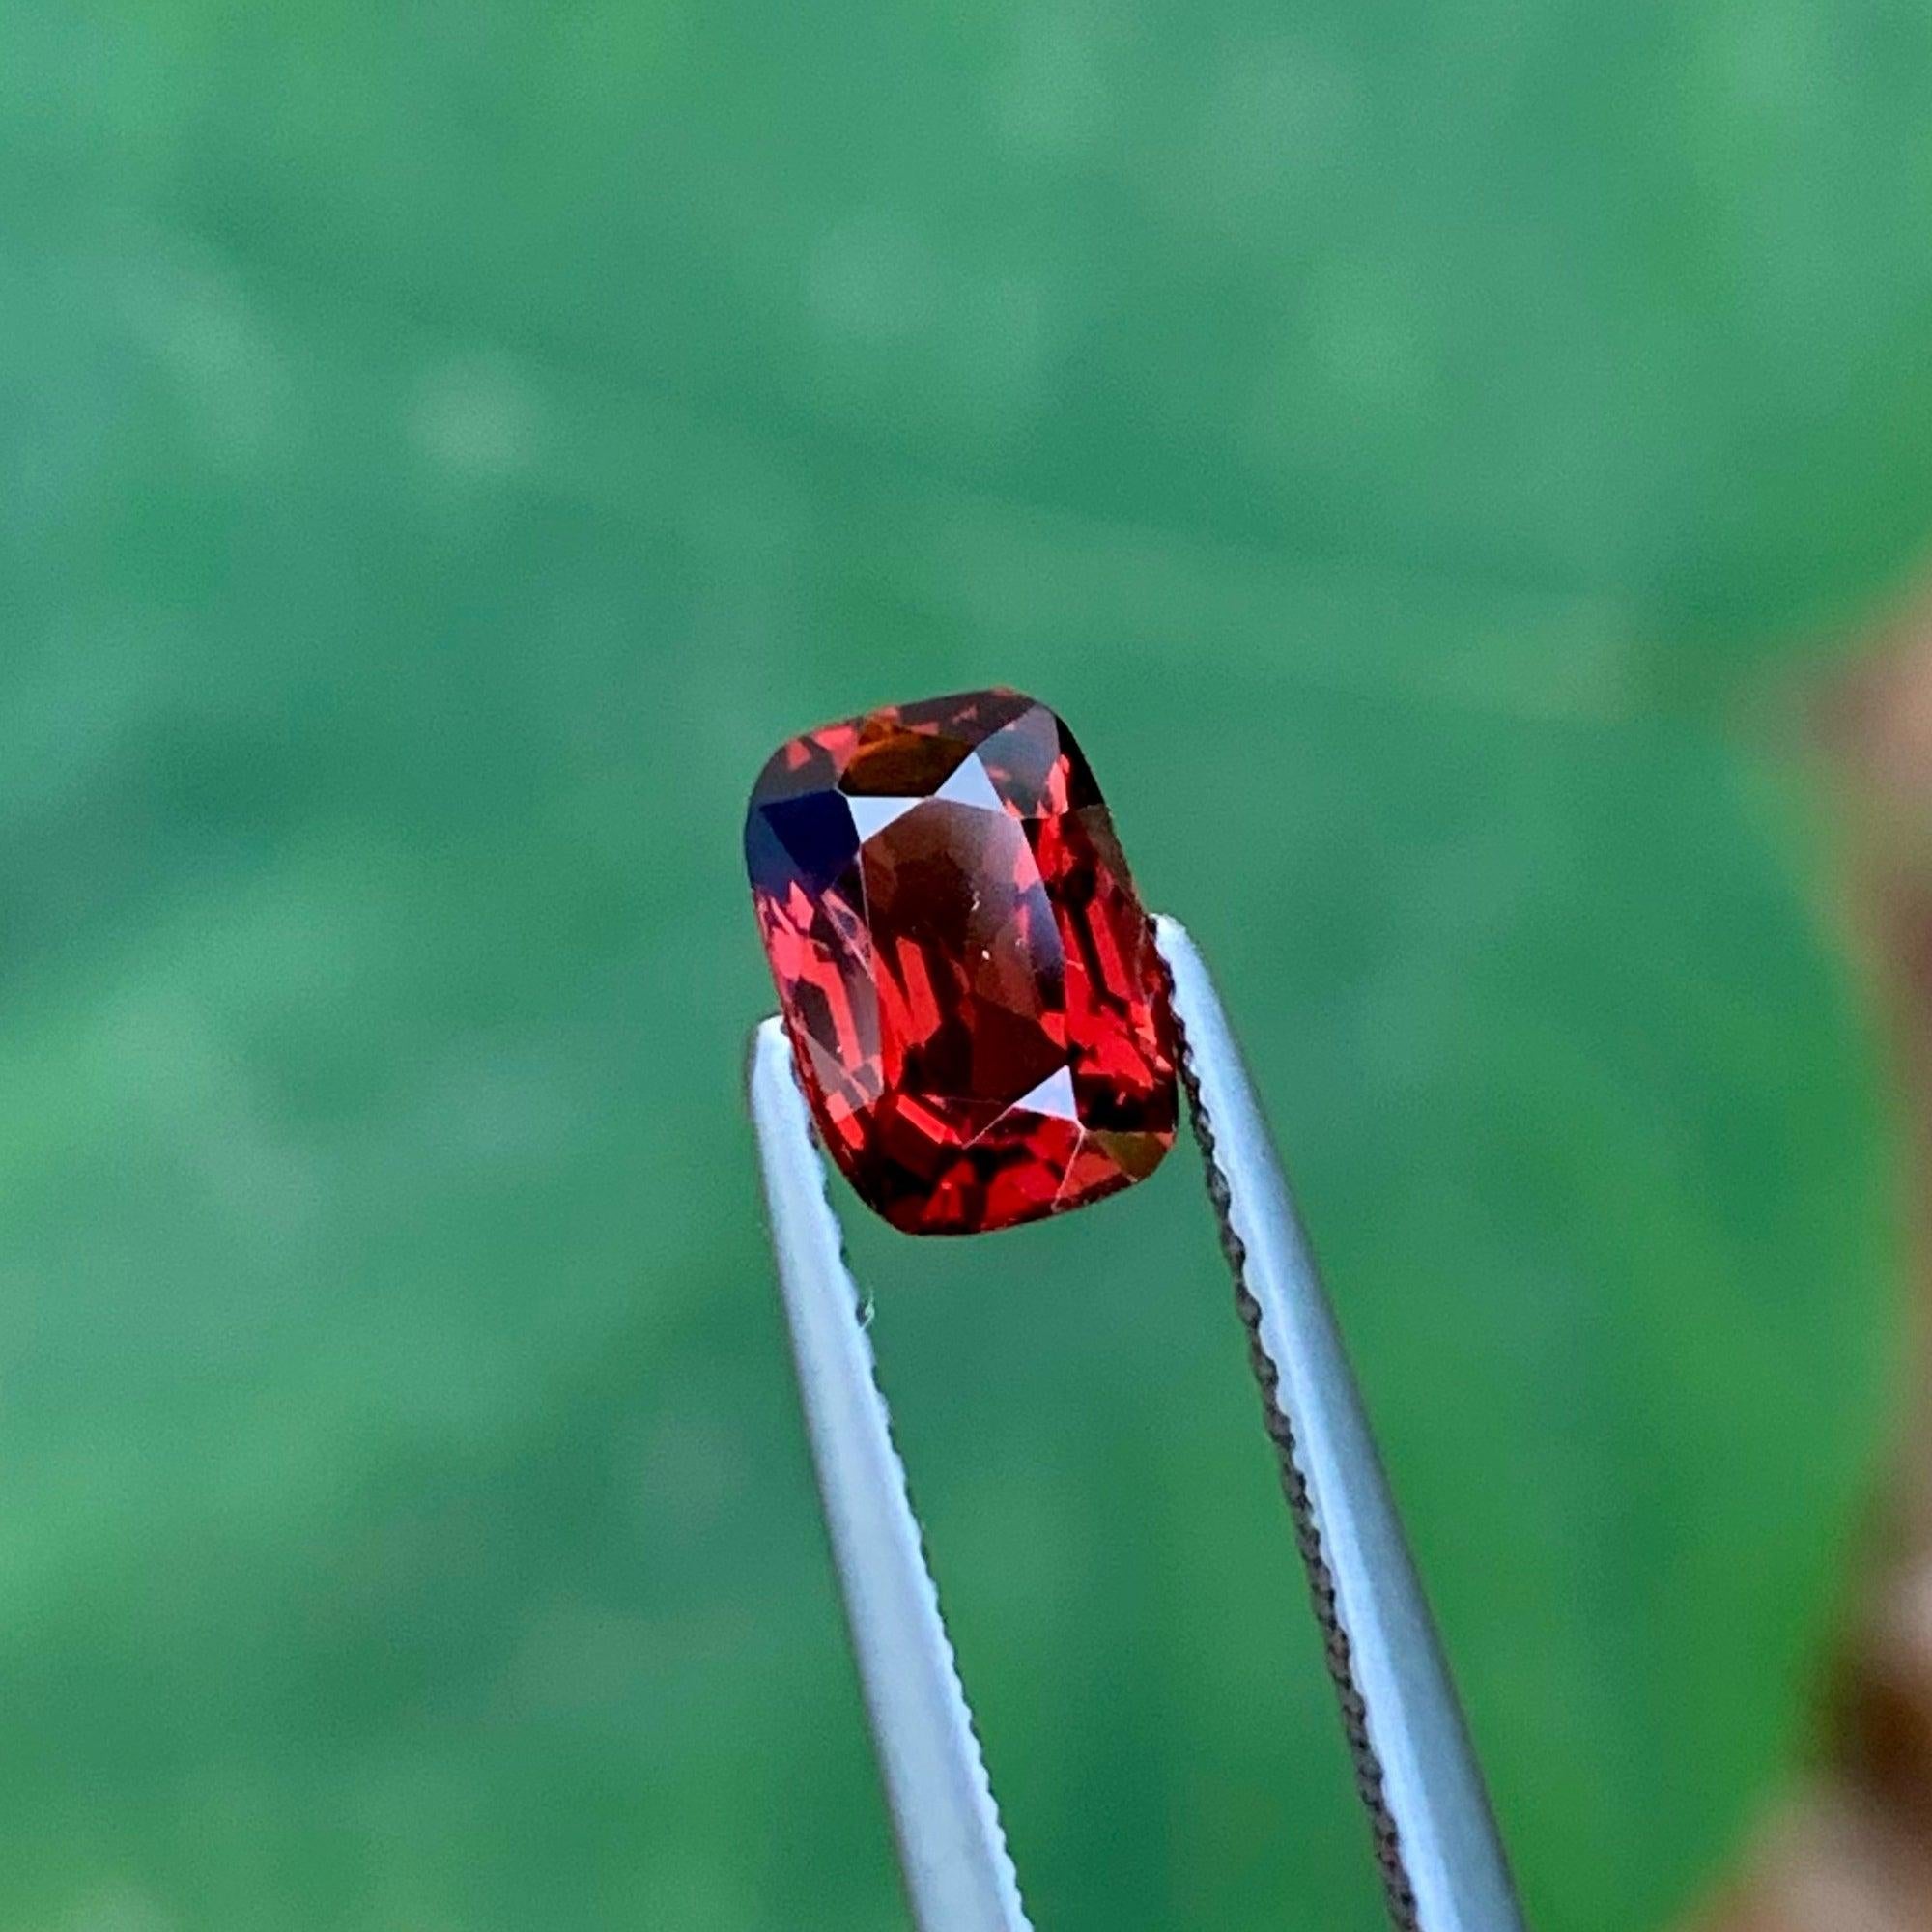 Exceptional Red Spinel Loose Gemstone, Available For Sale At Wholesale Price Natural High Quality 1.20 Carats Unheated Natural Spinel from Burma.

Product Information:
GEMSTONE TYPE:	Exceptional Red Spinel Loose Gemstone
WEIGHT:	1.20